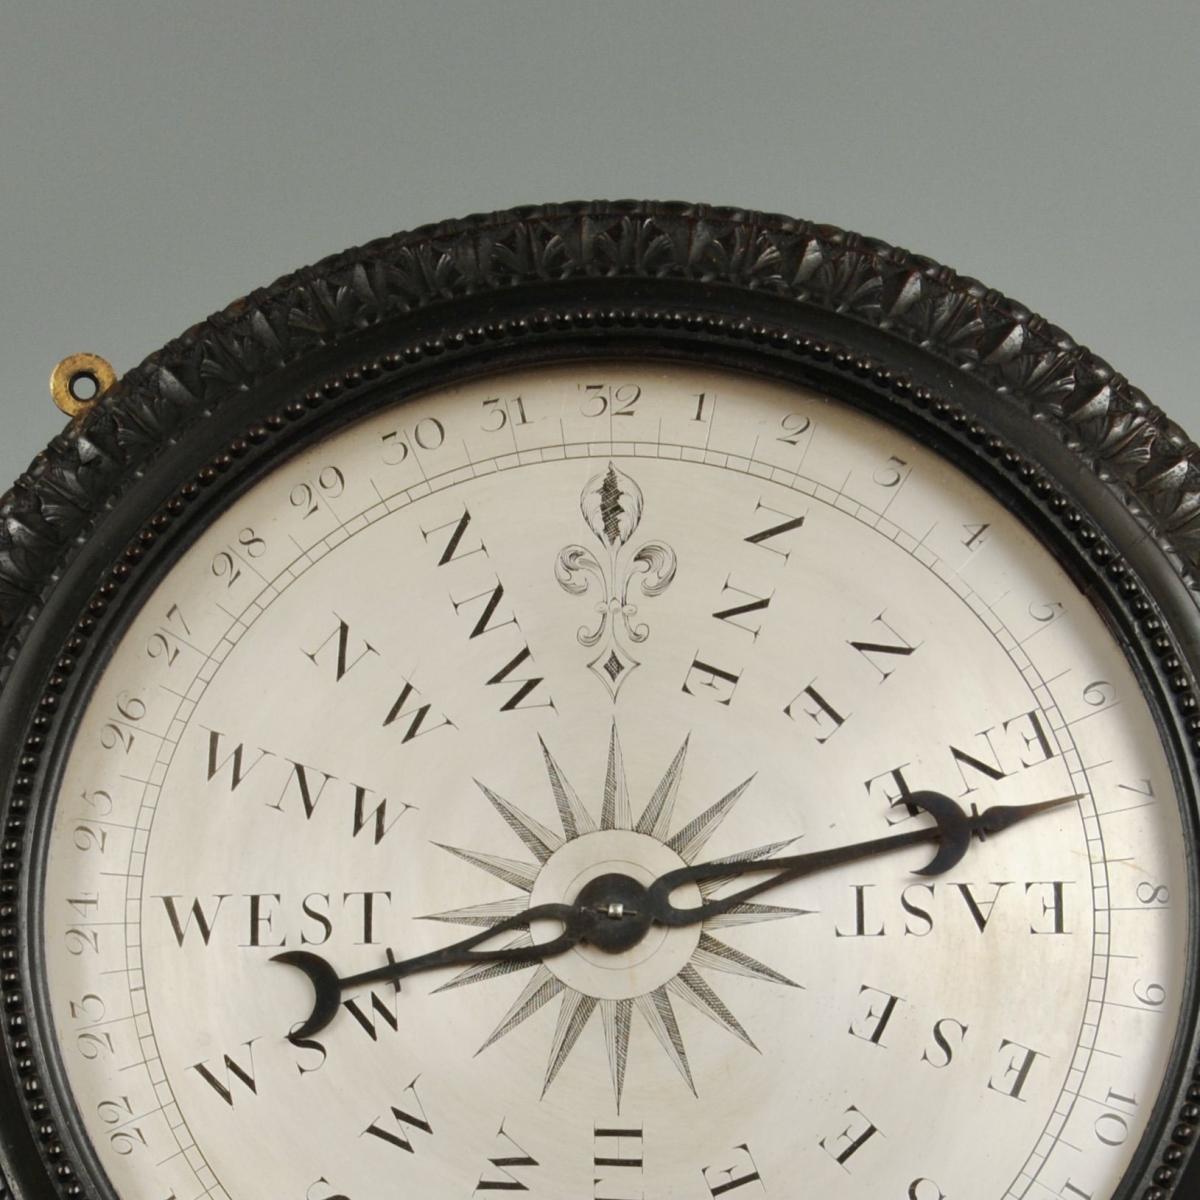 A Very Rare Wind Vane Dial in the Manner of Whitehurst